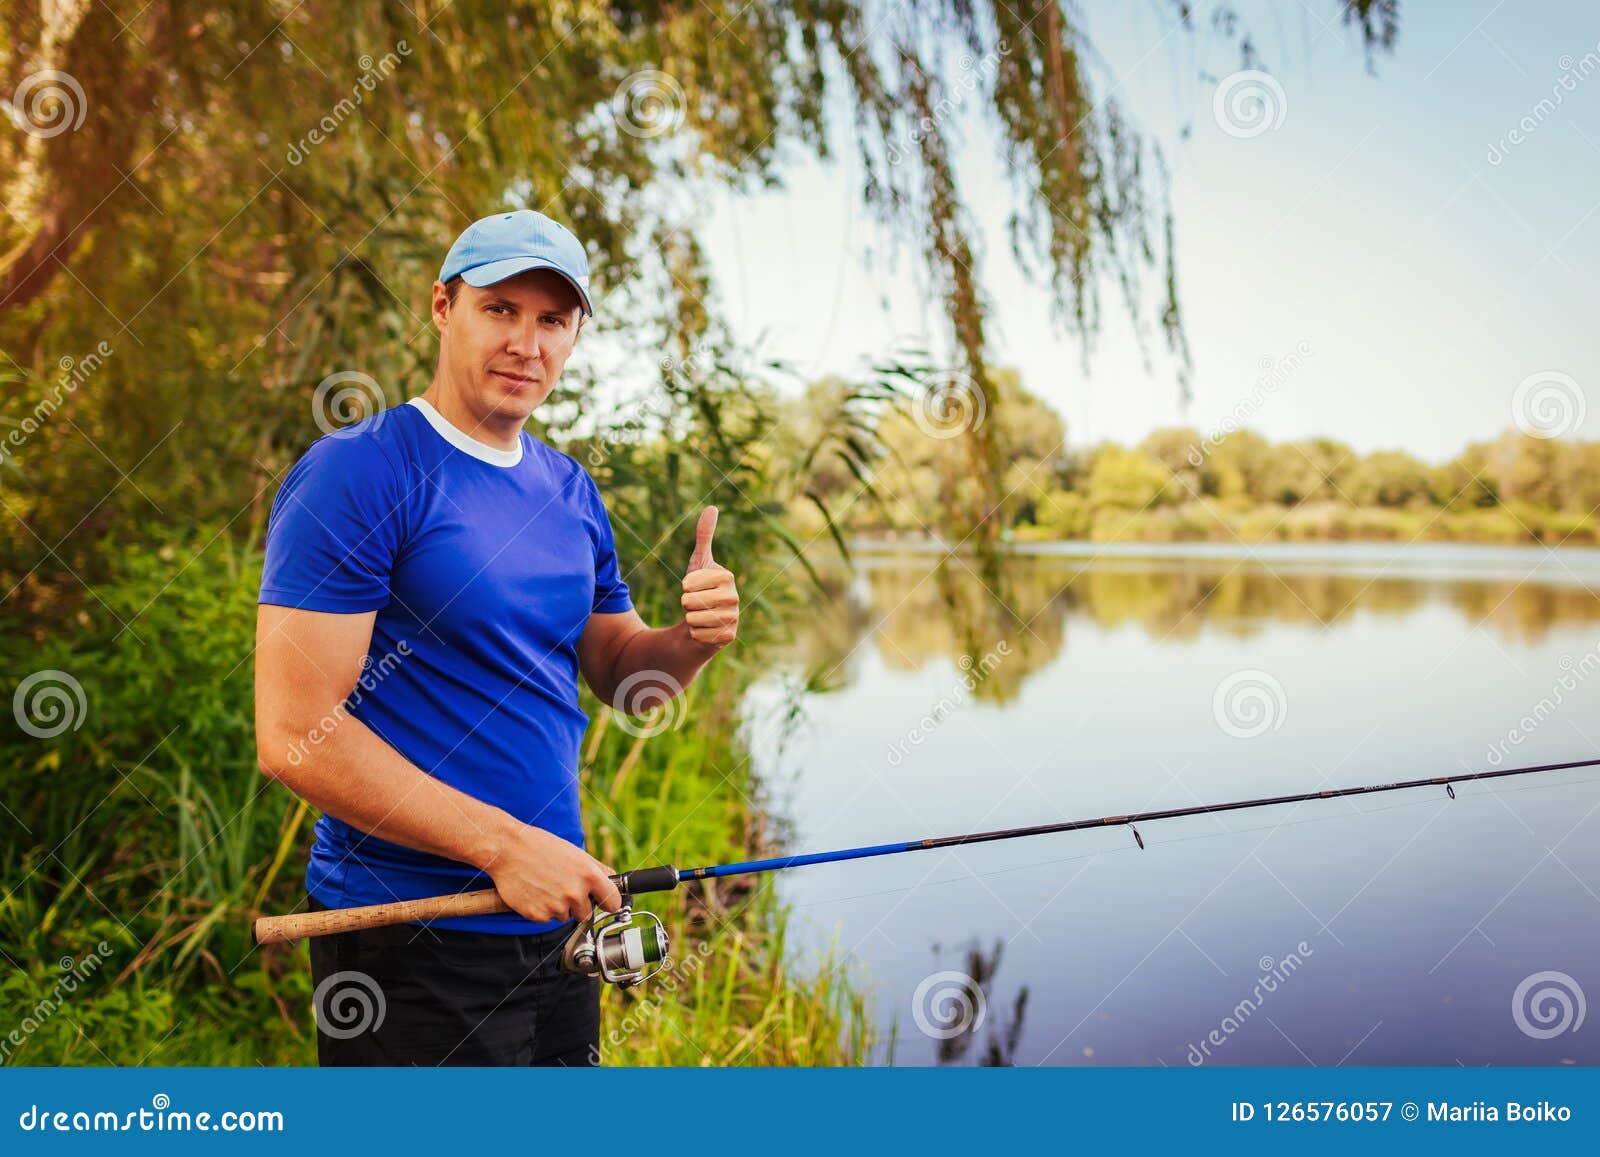 https://thumbs.dreamstime.com/z/young-man-fishing-river-happy-fiserman-showing-thumb-up-hobby-concept-summer-activities-man-relaxing-chilling-outdoors-126576057.jpg